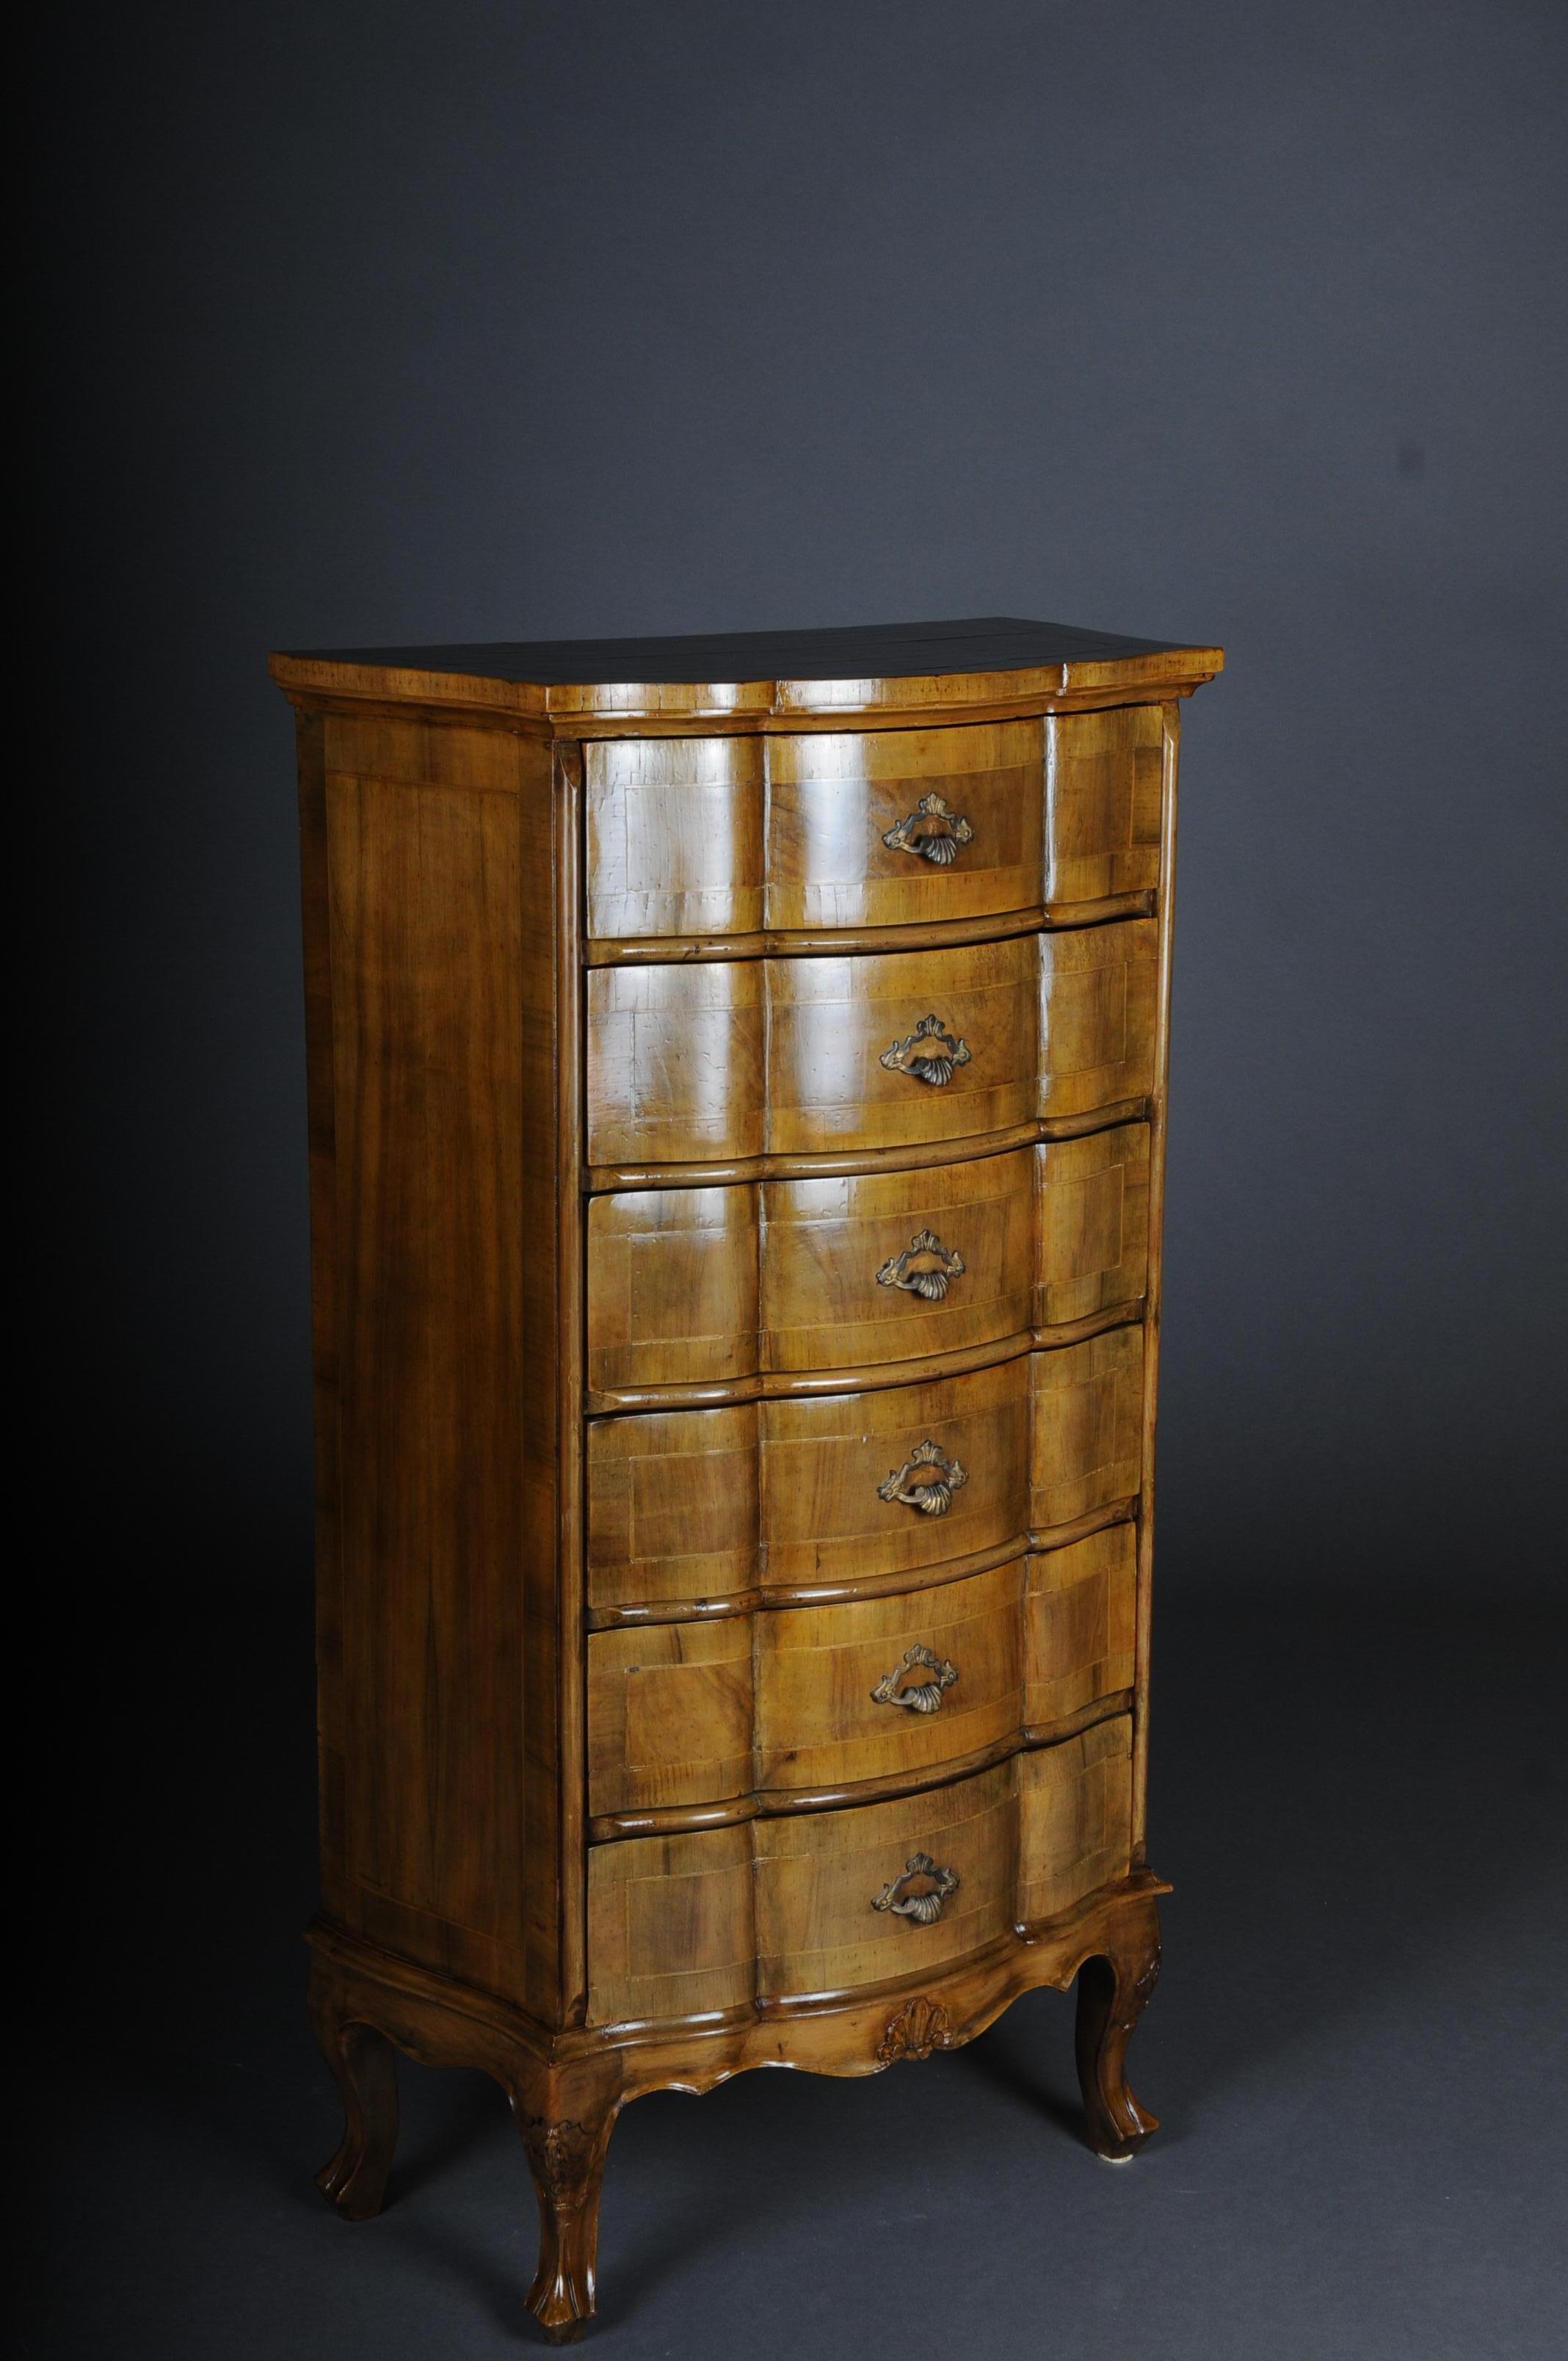 20th century Italian Baroque Chiffonniere/high chest of drawers
Walnut root veneer on solid wood. 6-drawer body. Italy - Baroque 20th century. Elegant piece of furniture with a curved body.

(D-86).
 